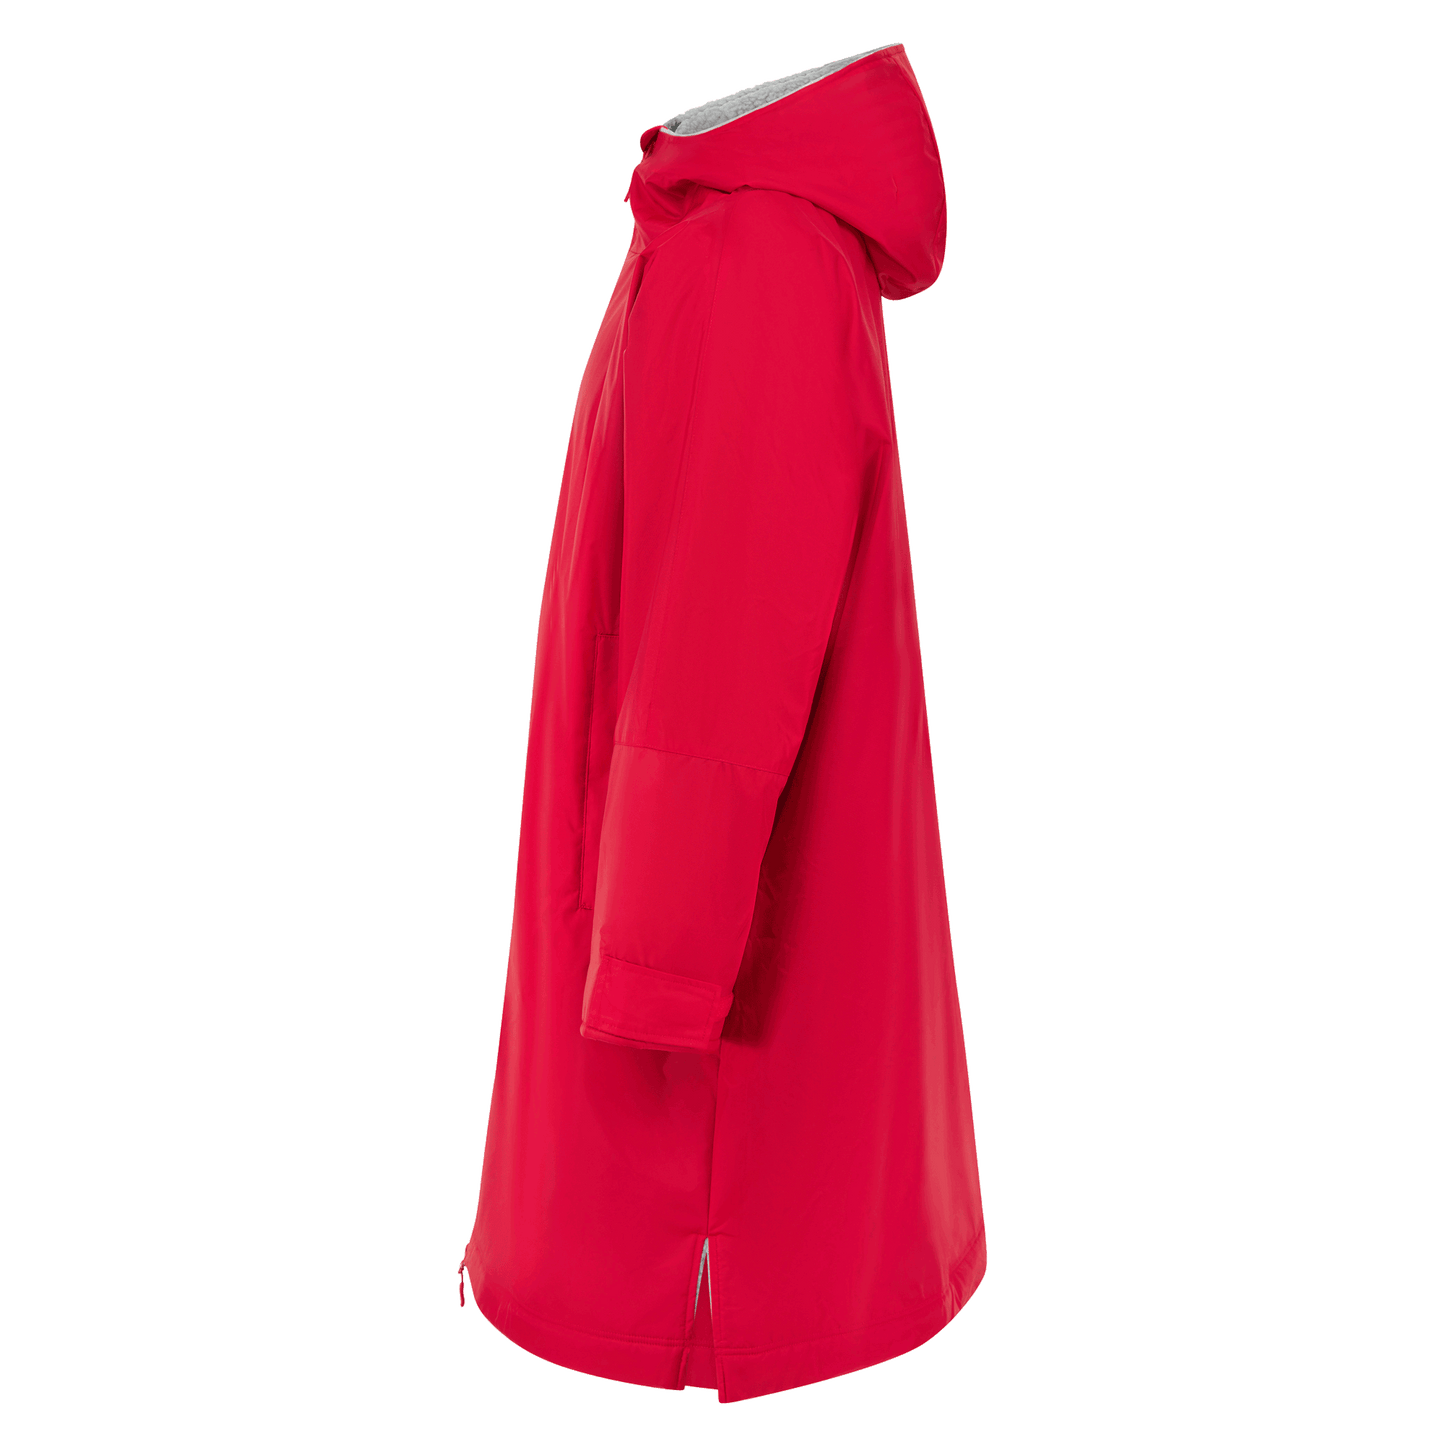 Rat Robe - Sherpa Fleece Lined Changing Robe - Red